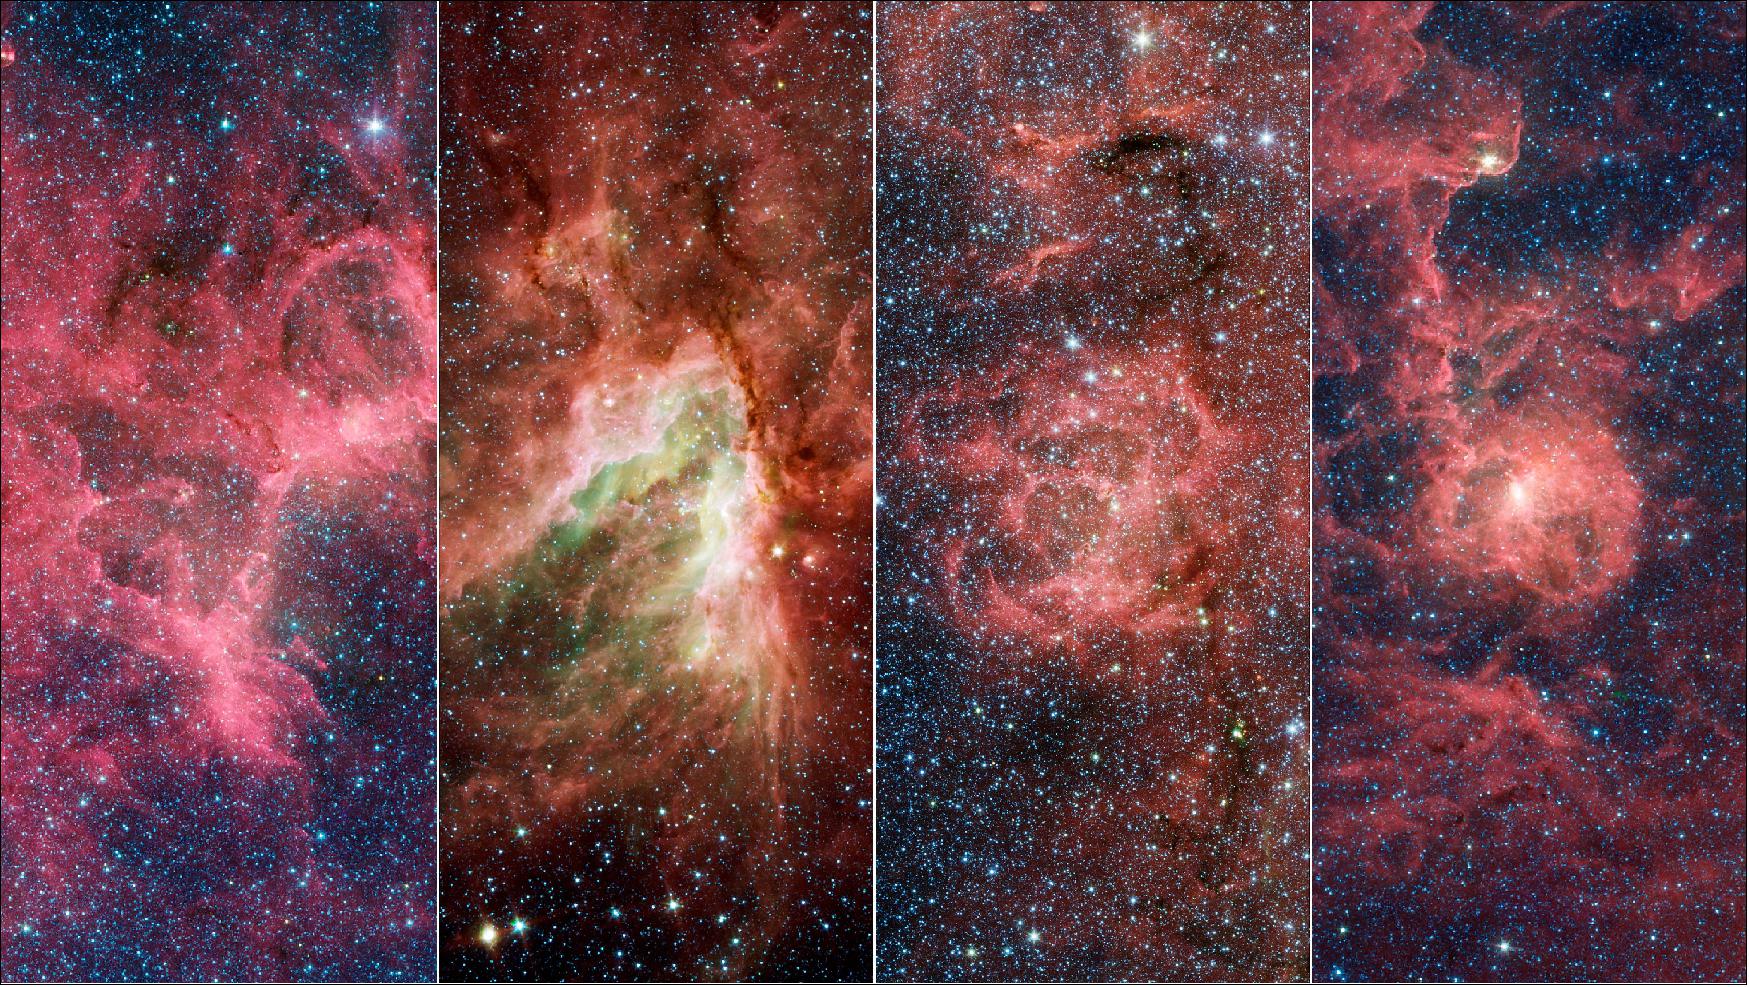 Figure 11: Shown here are the Eagle, Omega, Triffid, and Lagoon Nebulae, imaged by NASA's infrared Spitzer Space Telescope. These nebulae are part of a structure within the Milky Way's Sagittarius Arm that is poking out from the arm at a dramatic angle (image credit: NASA/JPL-Caltech)